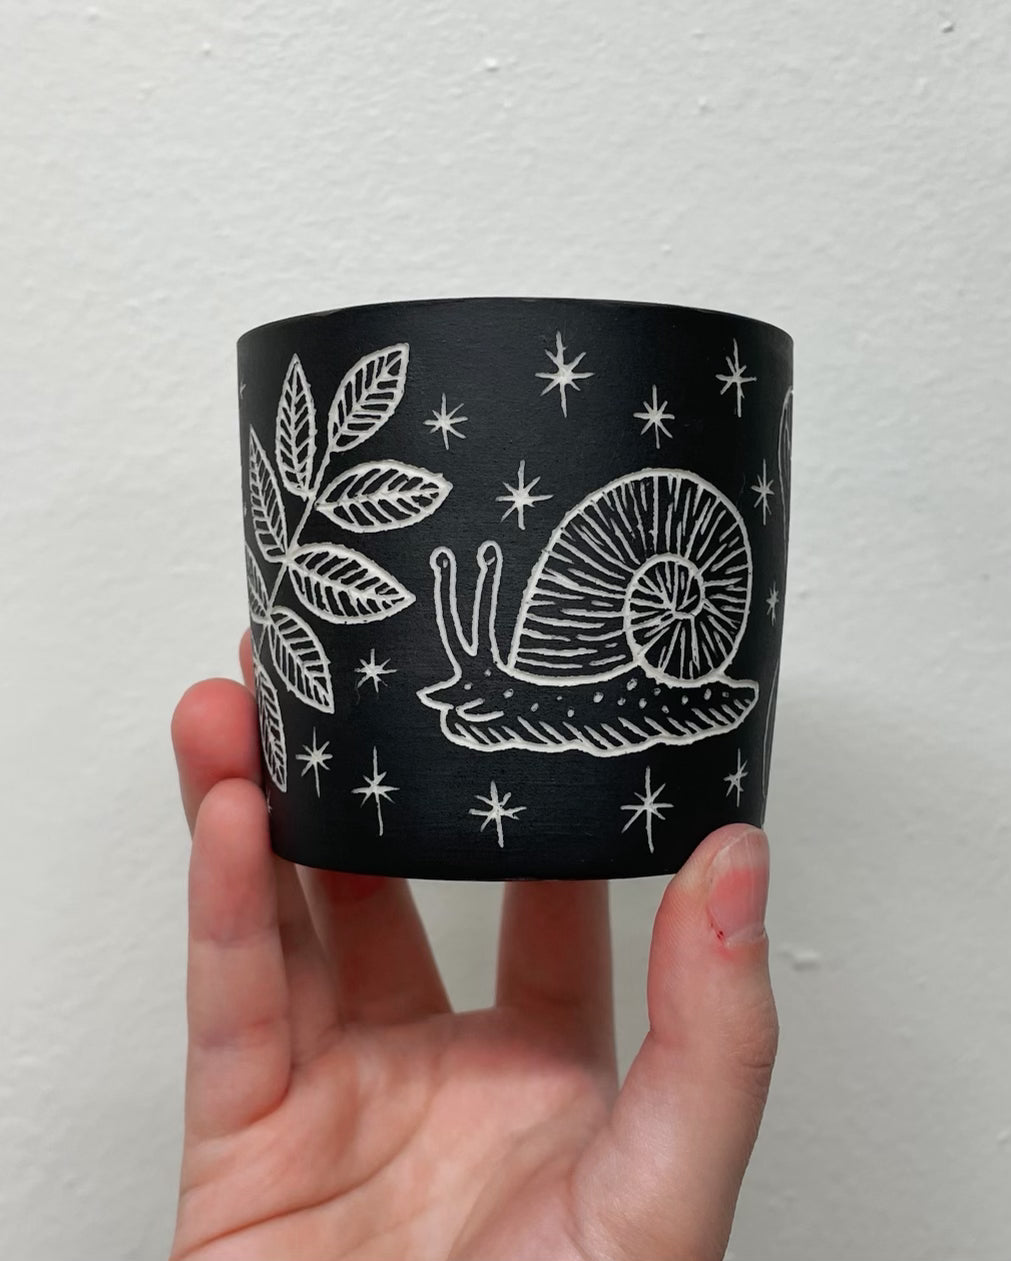 Bugs and Snails Sgraffito Tumbler (by Katie Kelly) Now ship in 6-8 weeks